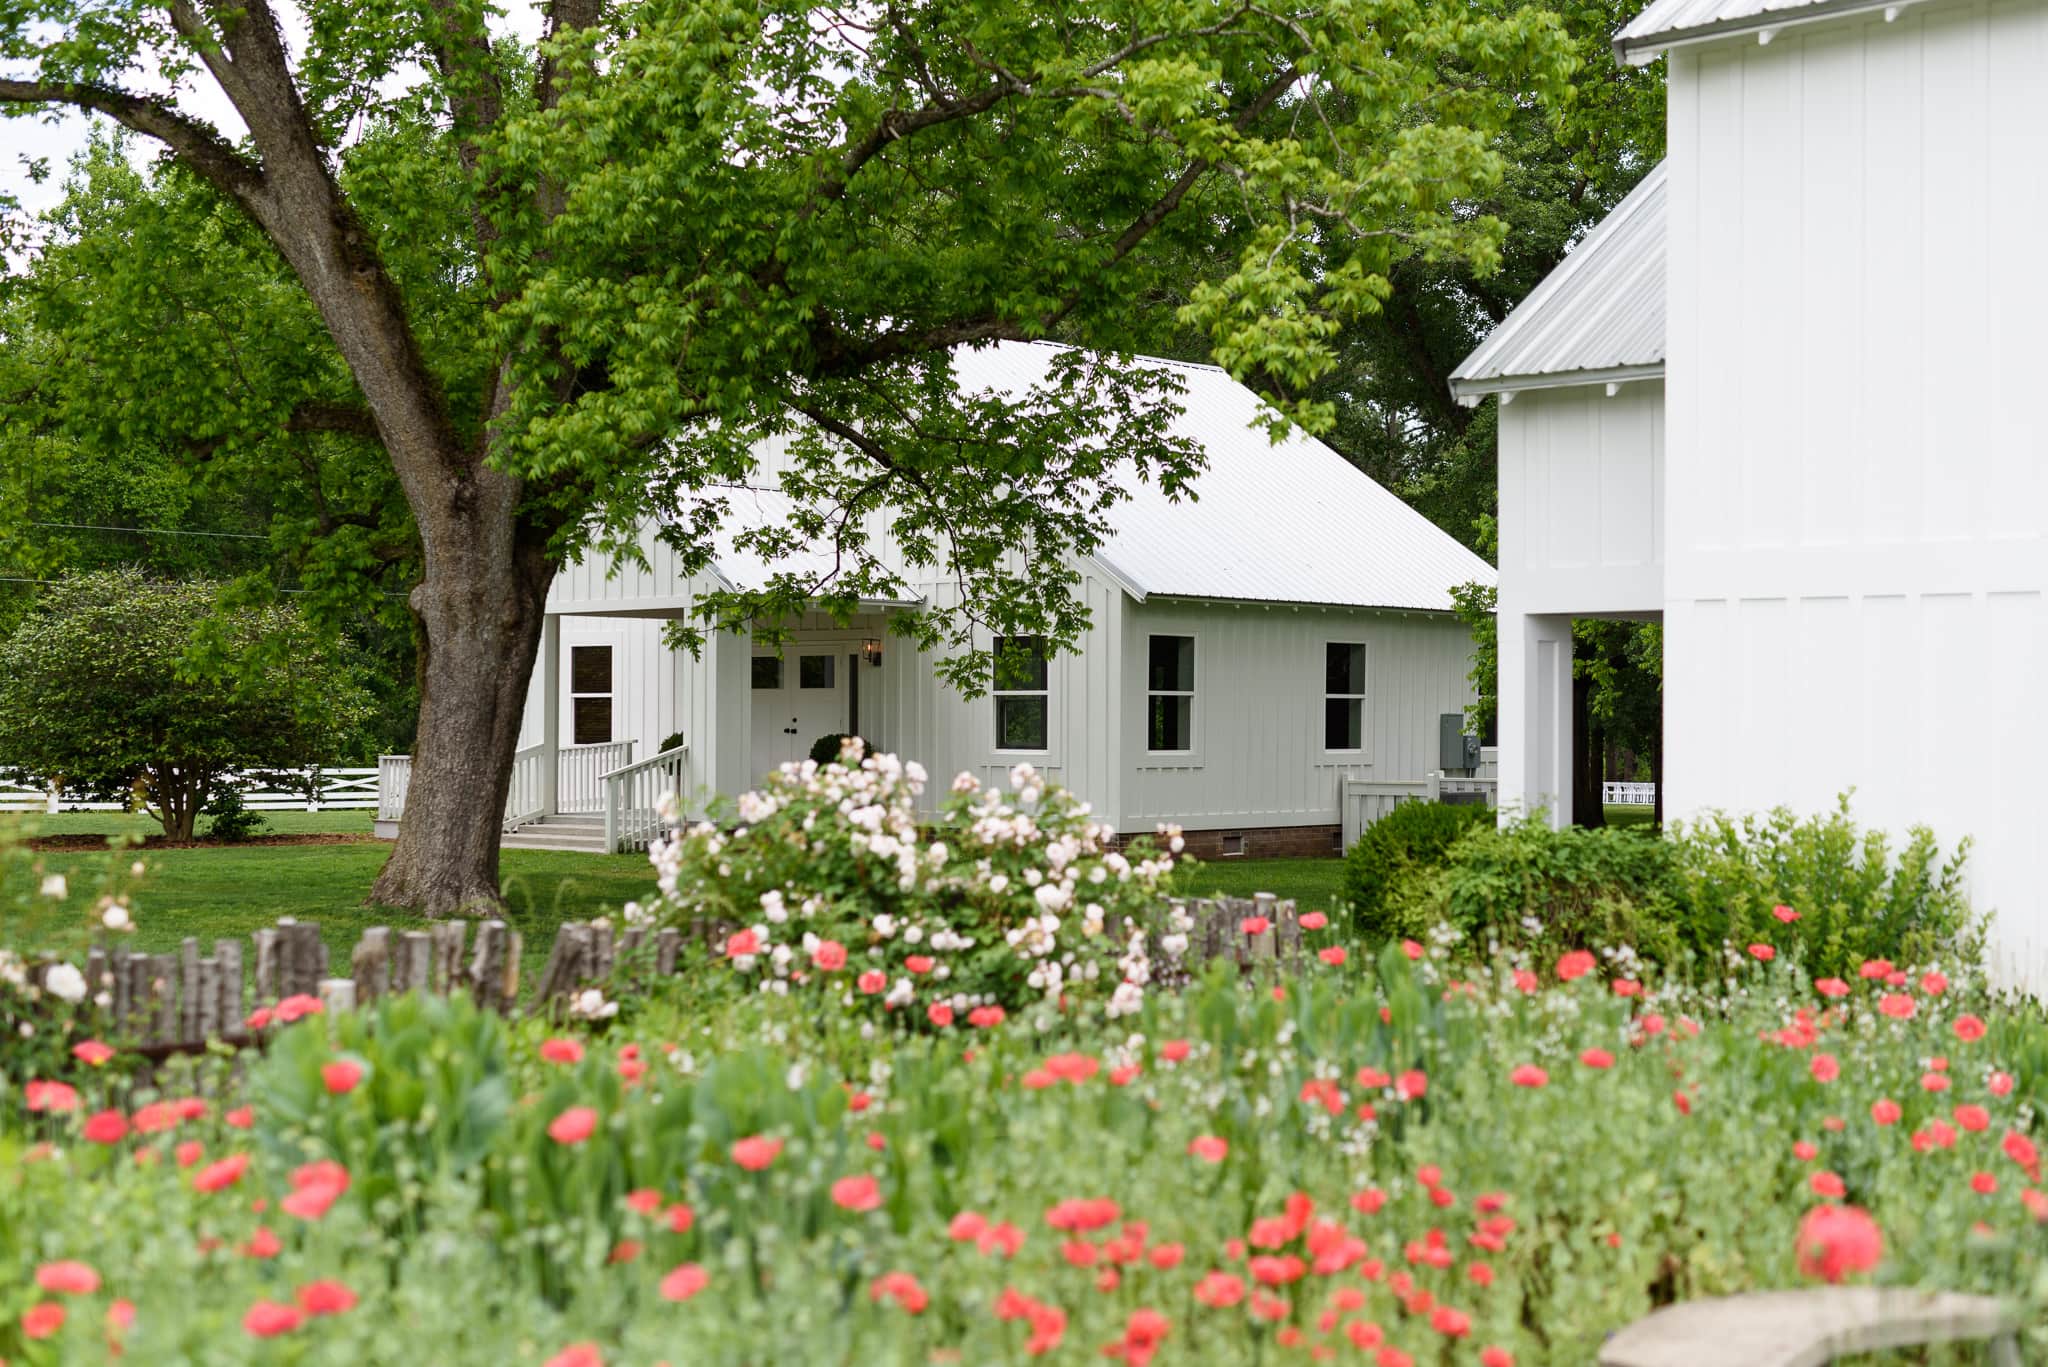 Flowers blooming in front of Bride's Cottage - Wildberry Farm